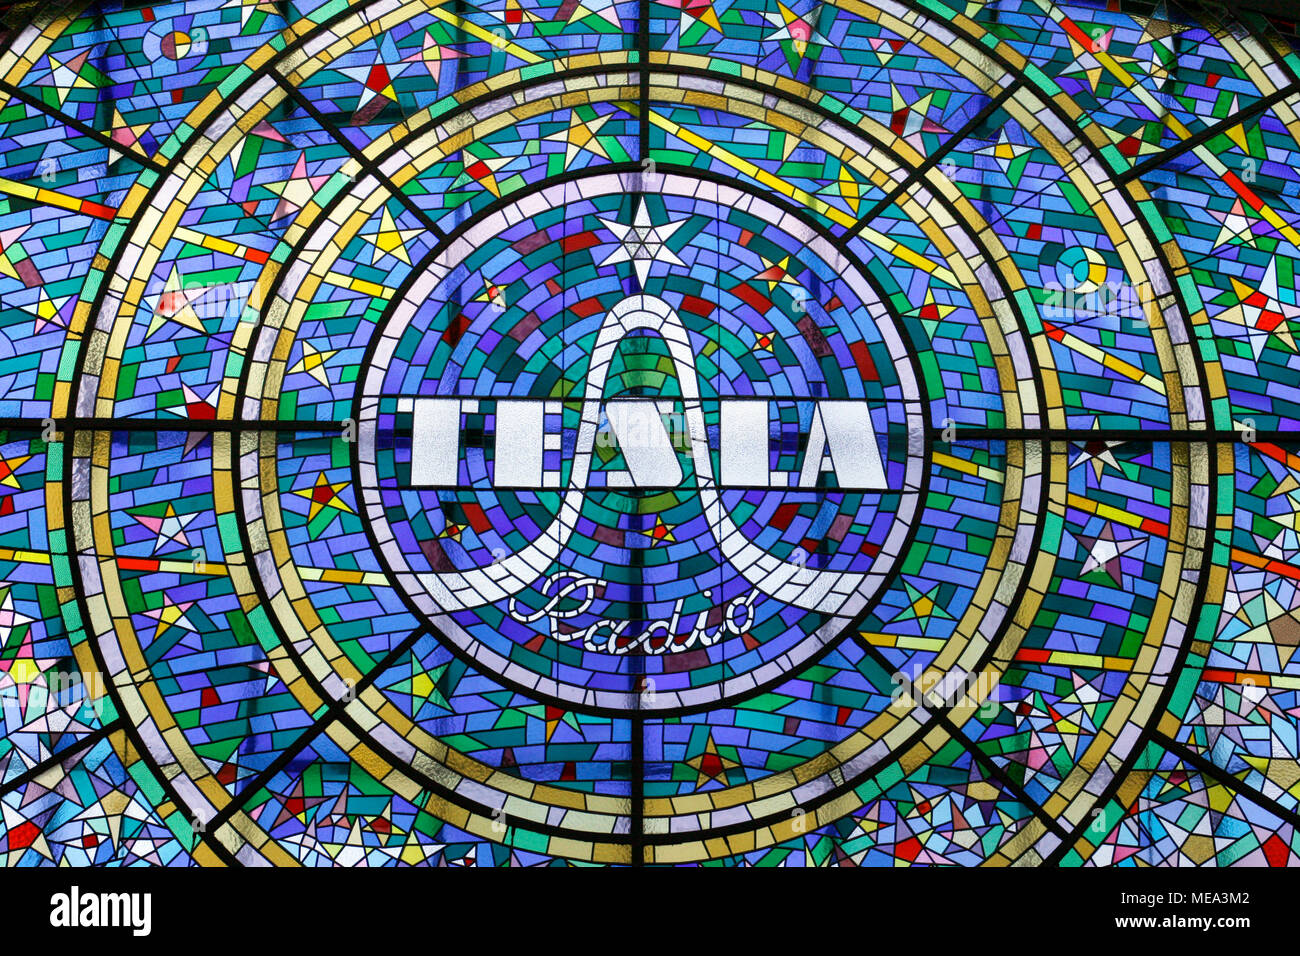 Stained glass mosaic advertising Tesla Radio which was a state-owned electrotechnical conglomerate in the former Czechoslovakia in Passage Svetozor one of the small shopping alleyways in the backstreets around Wenceclas Square in Nove mesto district in Prague Czech republic Stock Photo